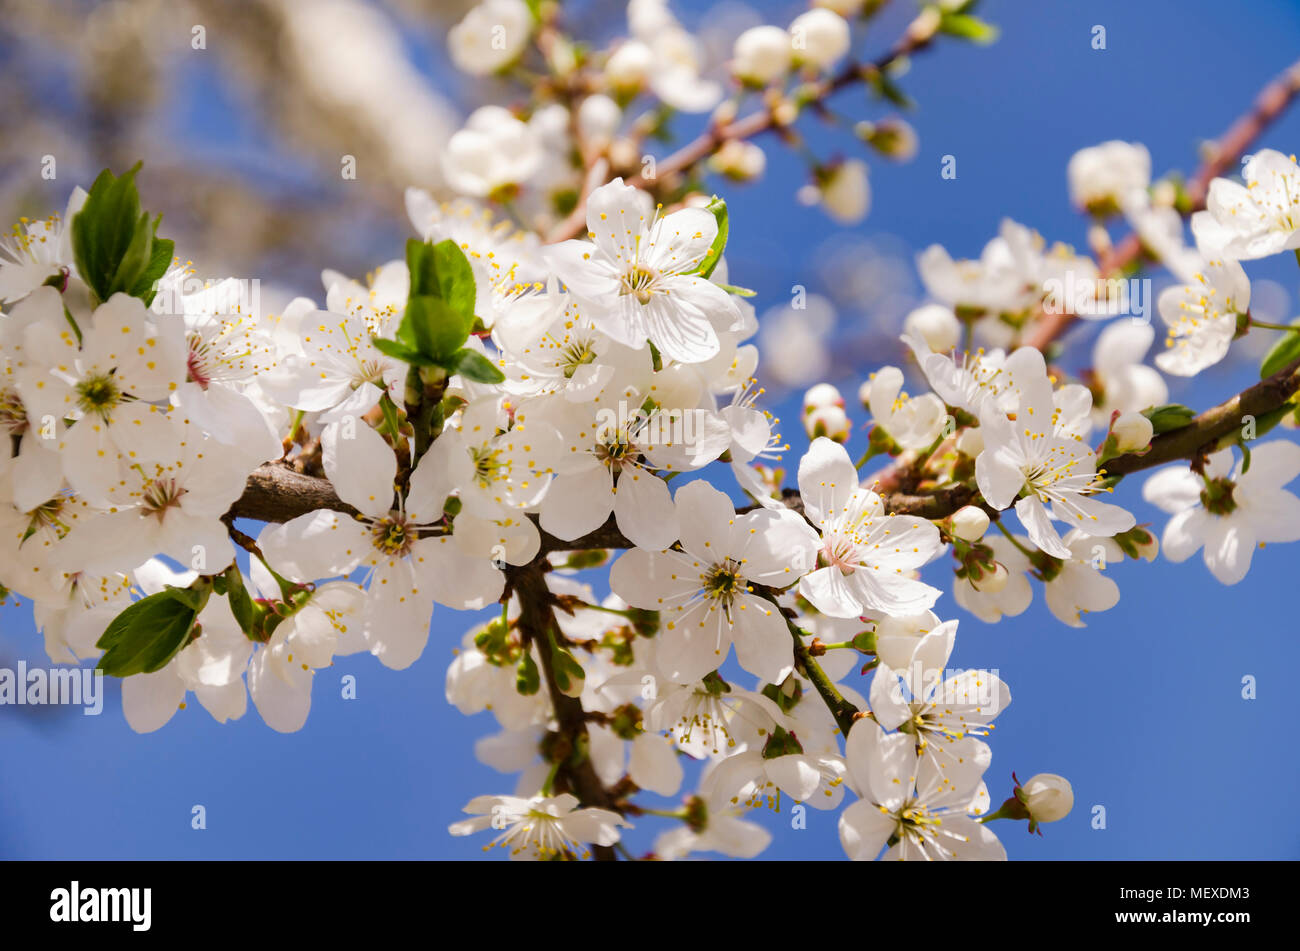 white beautiful flowering branch of a fruit tree, against a bright blue sky, close-up Stock Photo